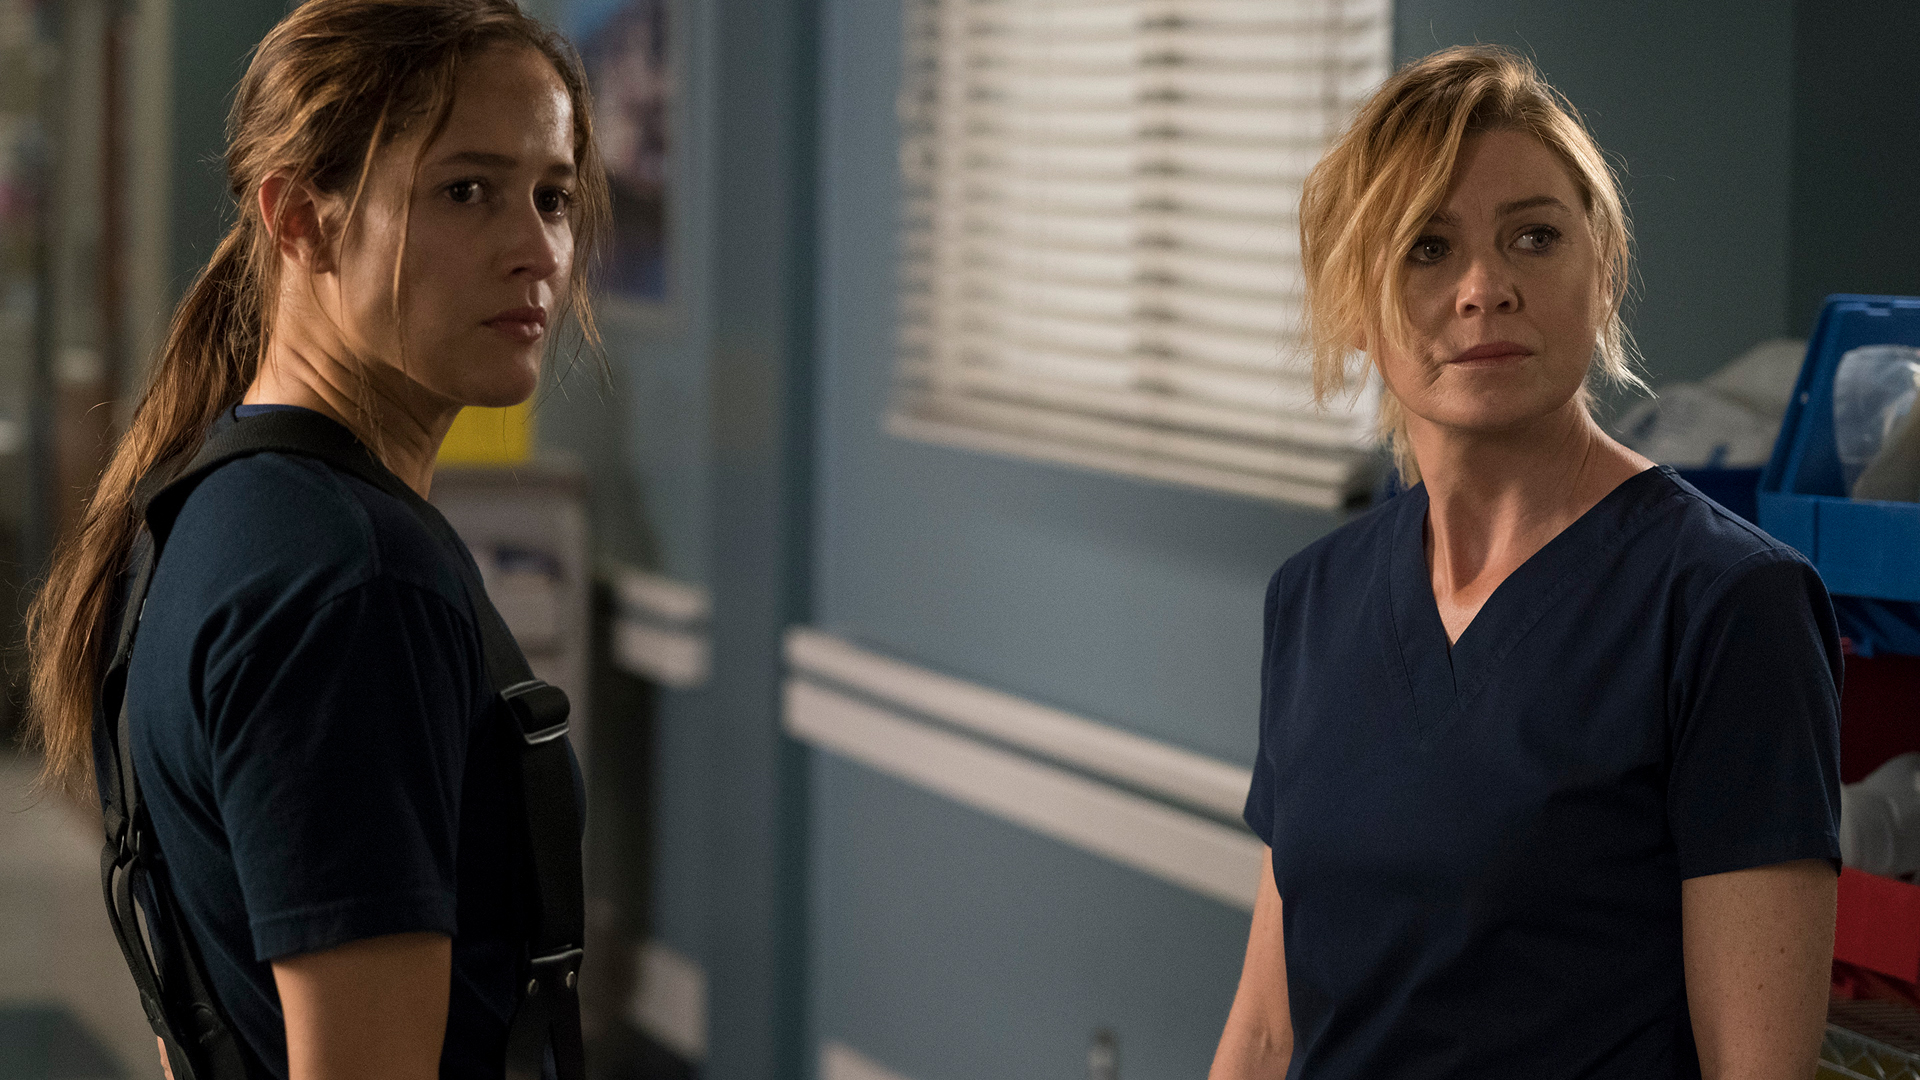 Jaina Lee Ortiz as Andy Herrera and Ellen Pompeo as Meredith Grey from ‘Station 19’ and ‘Grey’s Anatomy’